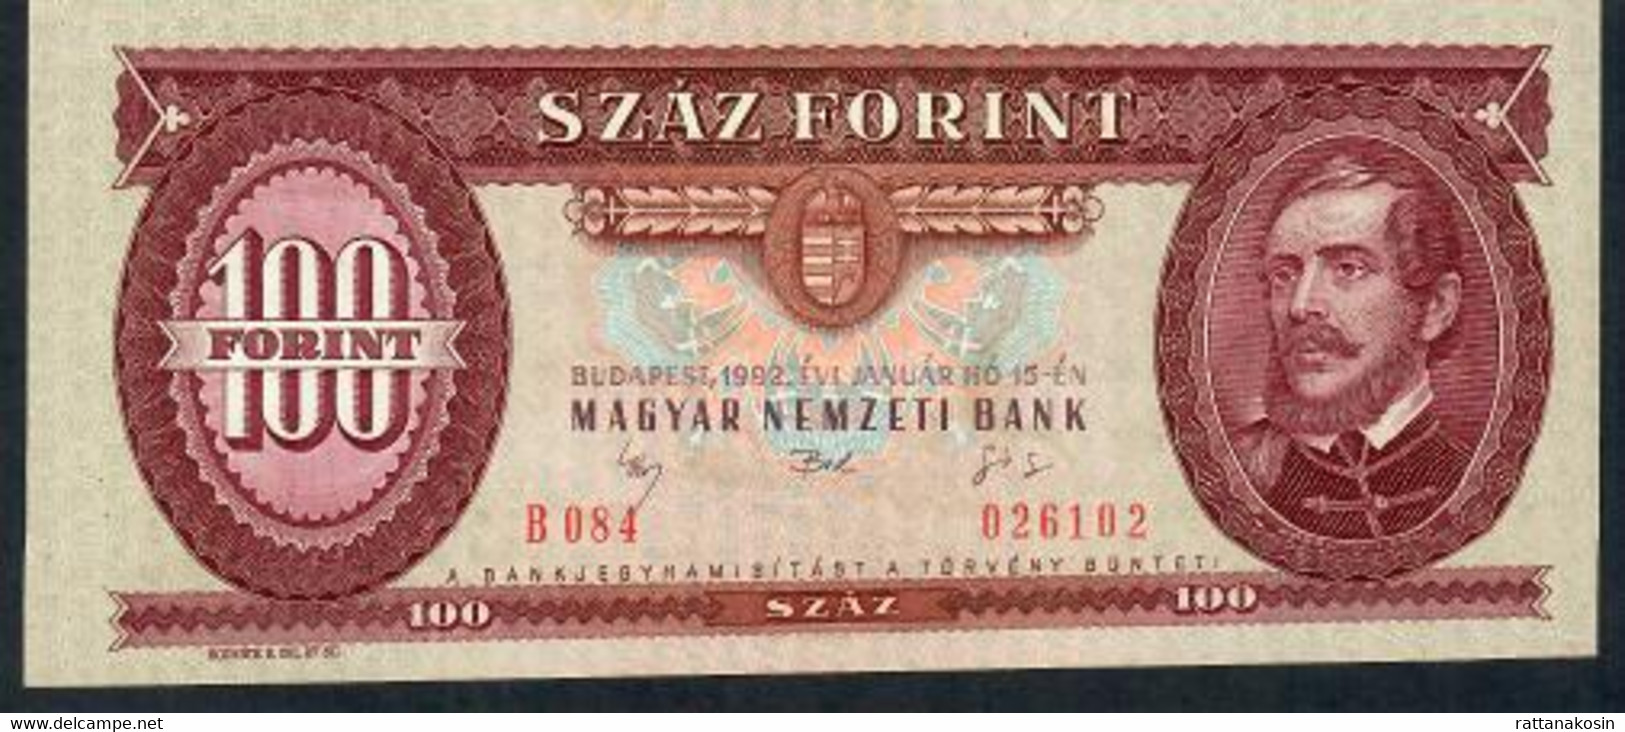 HUNGARY  P174a   100  FORINT    1992    UNC. - Ungheria